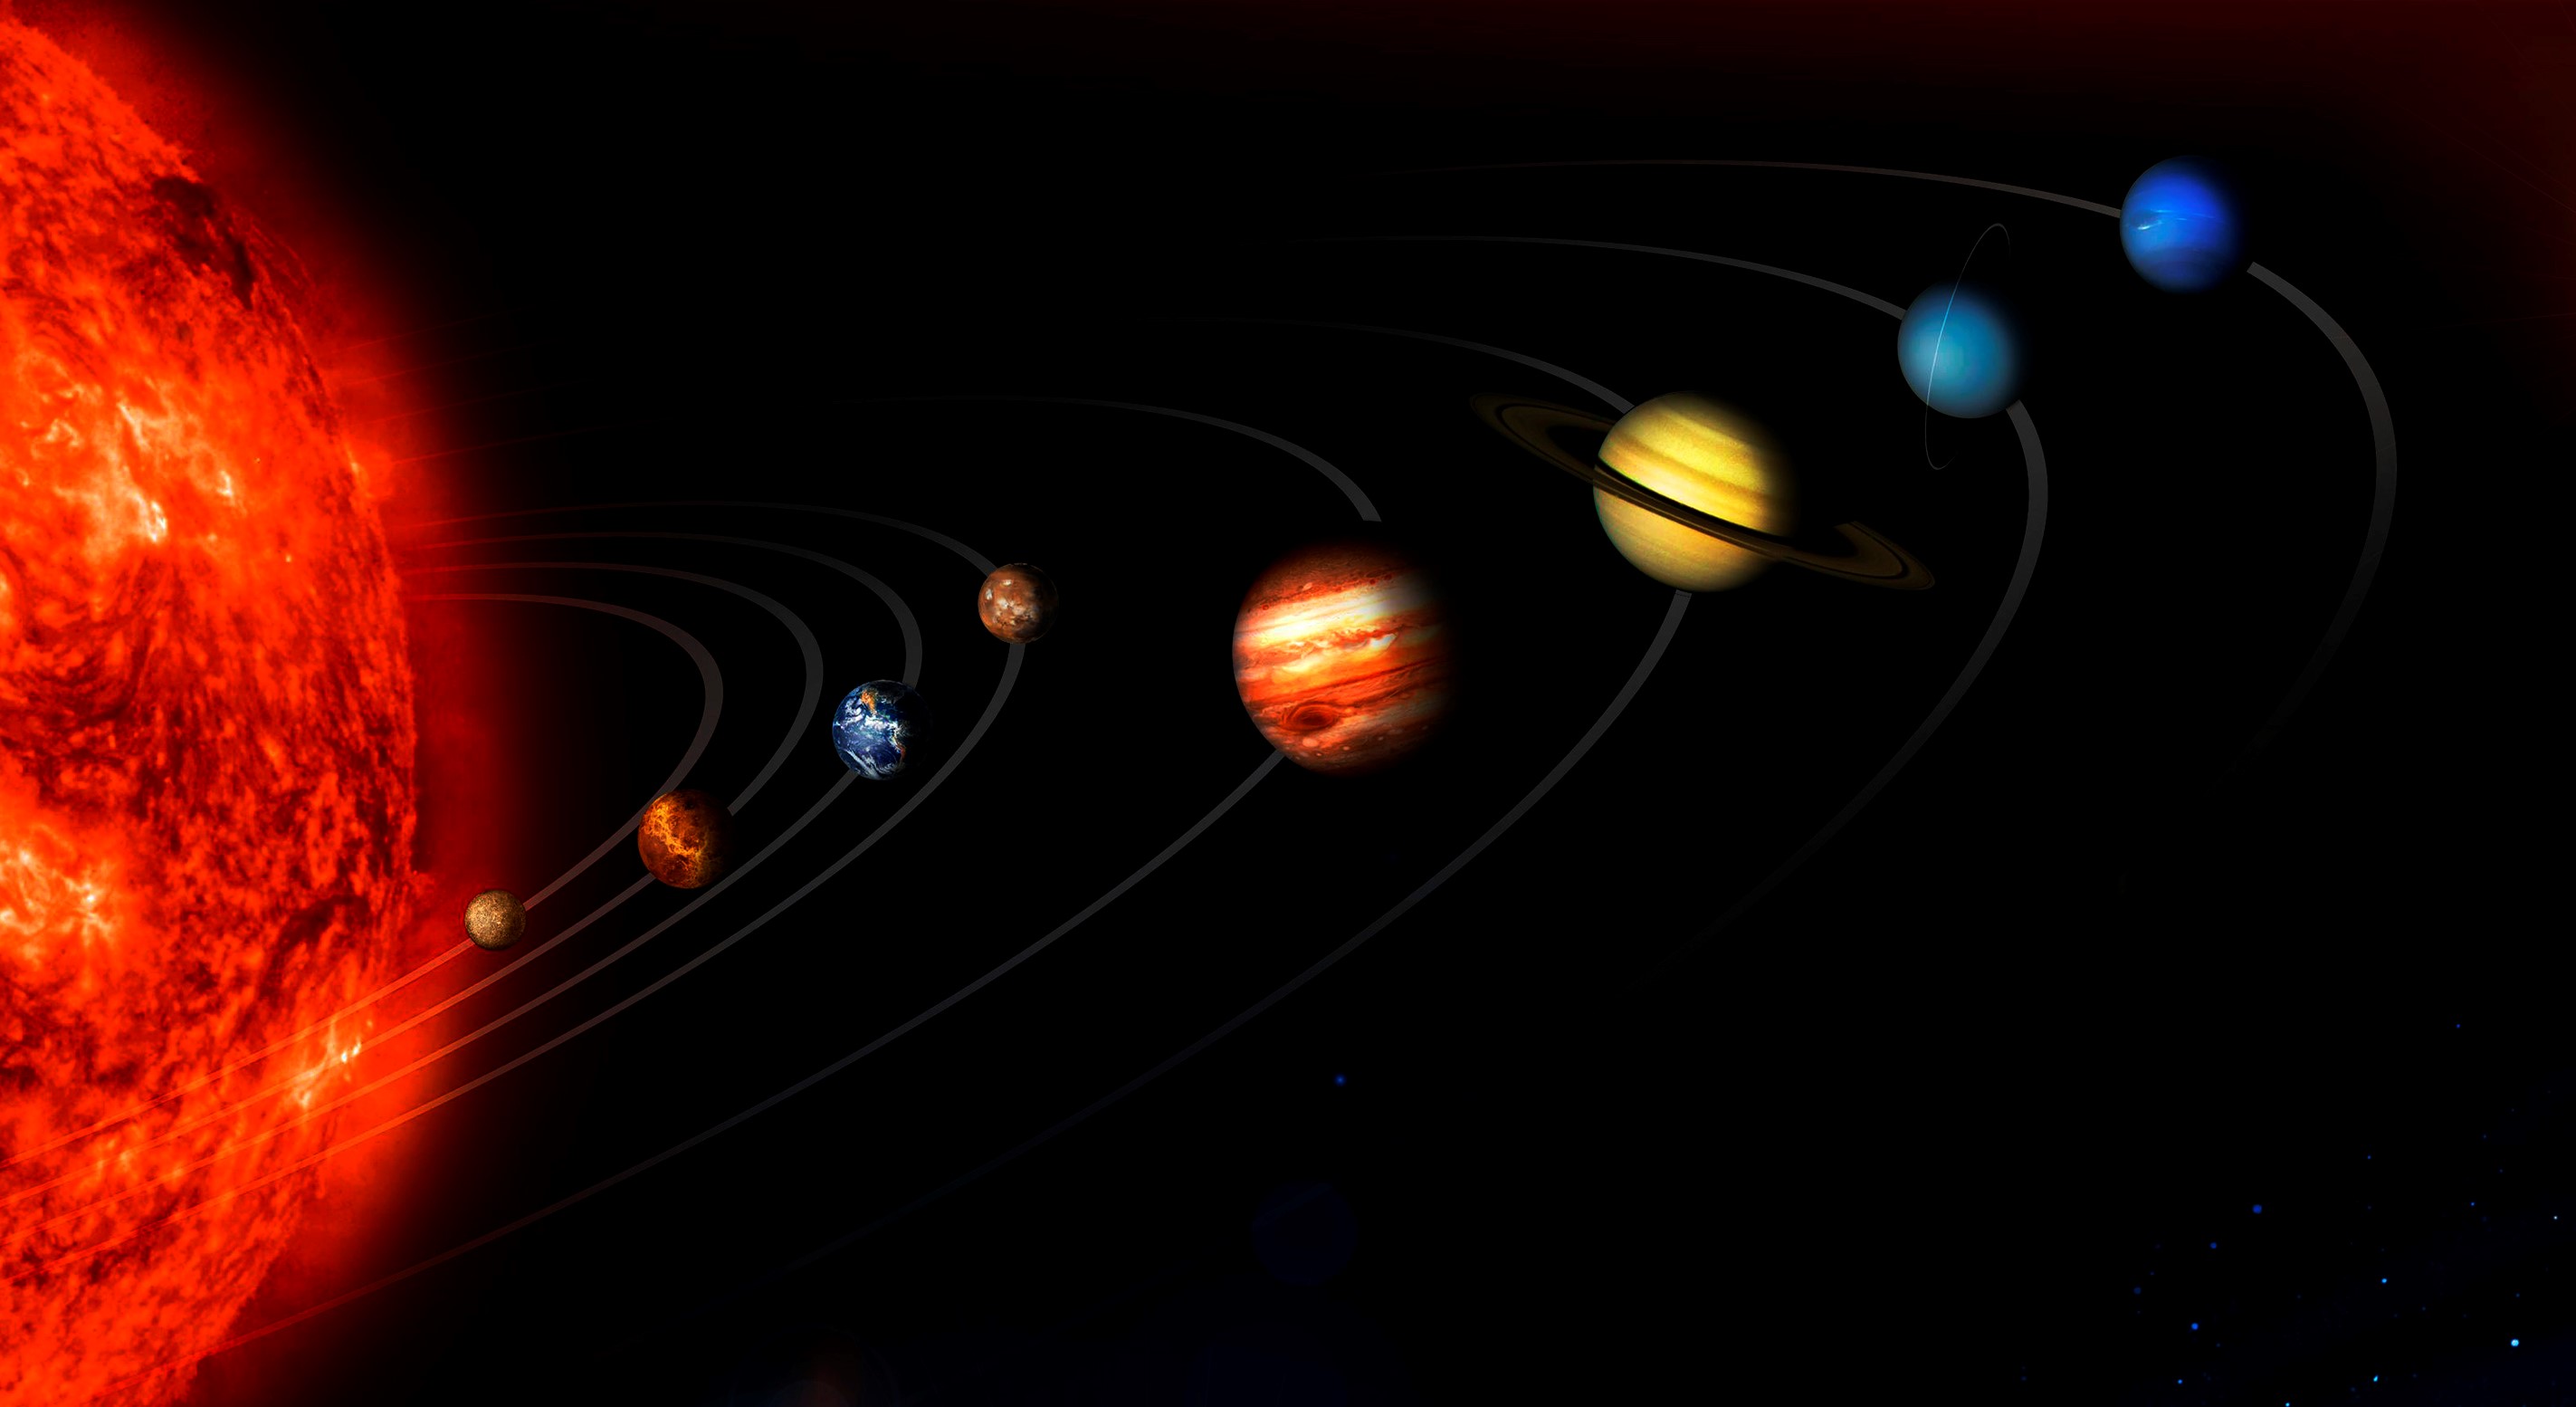 An image of our solar system